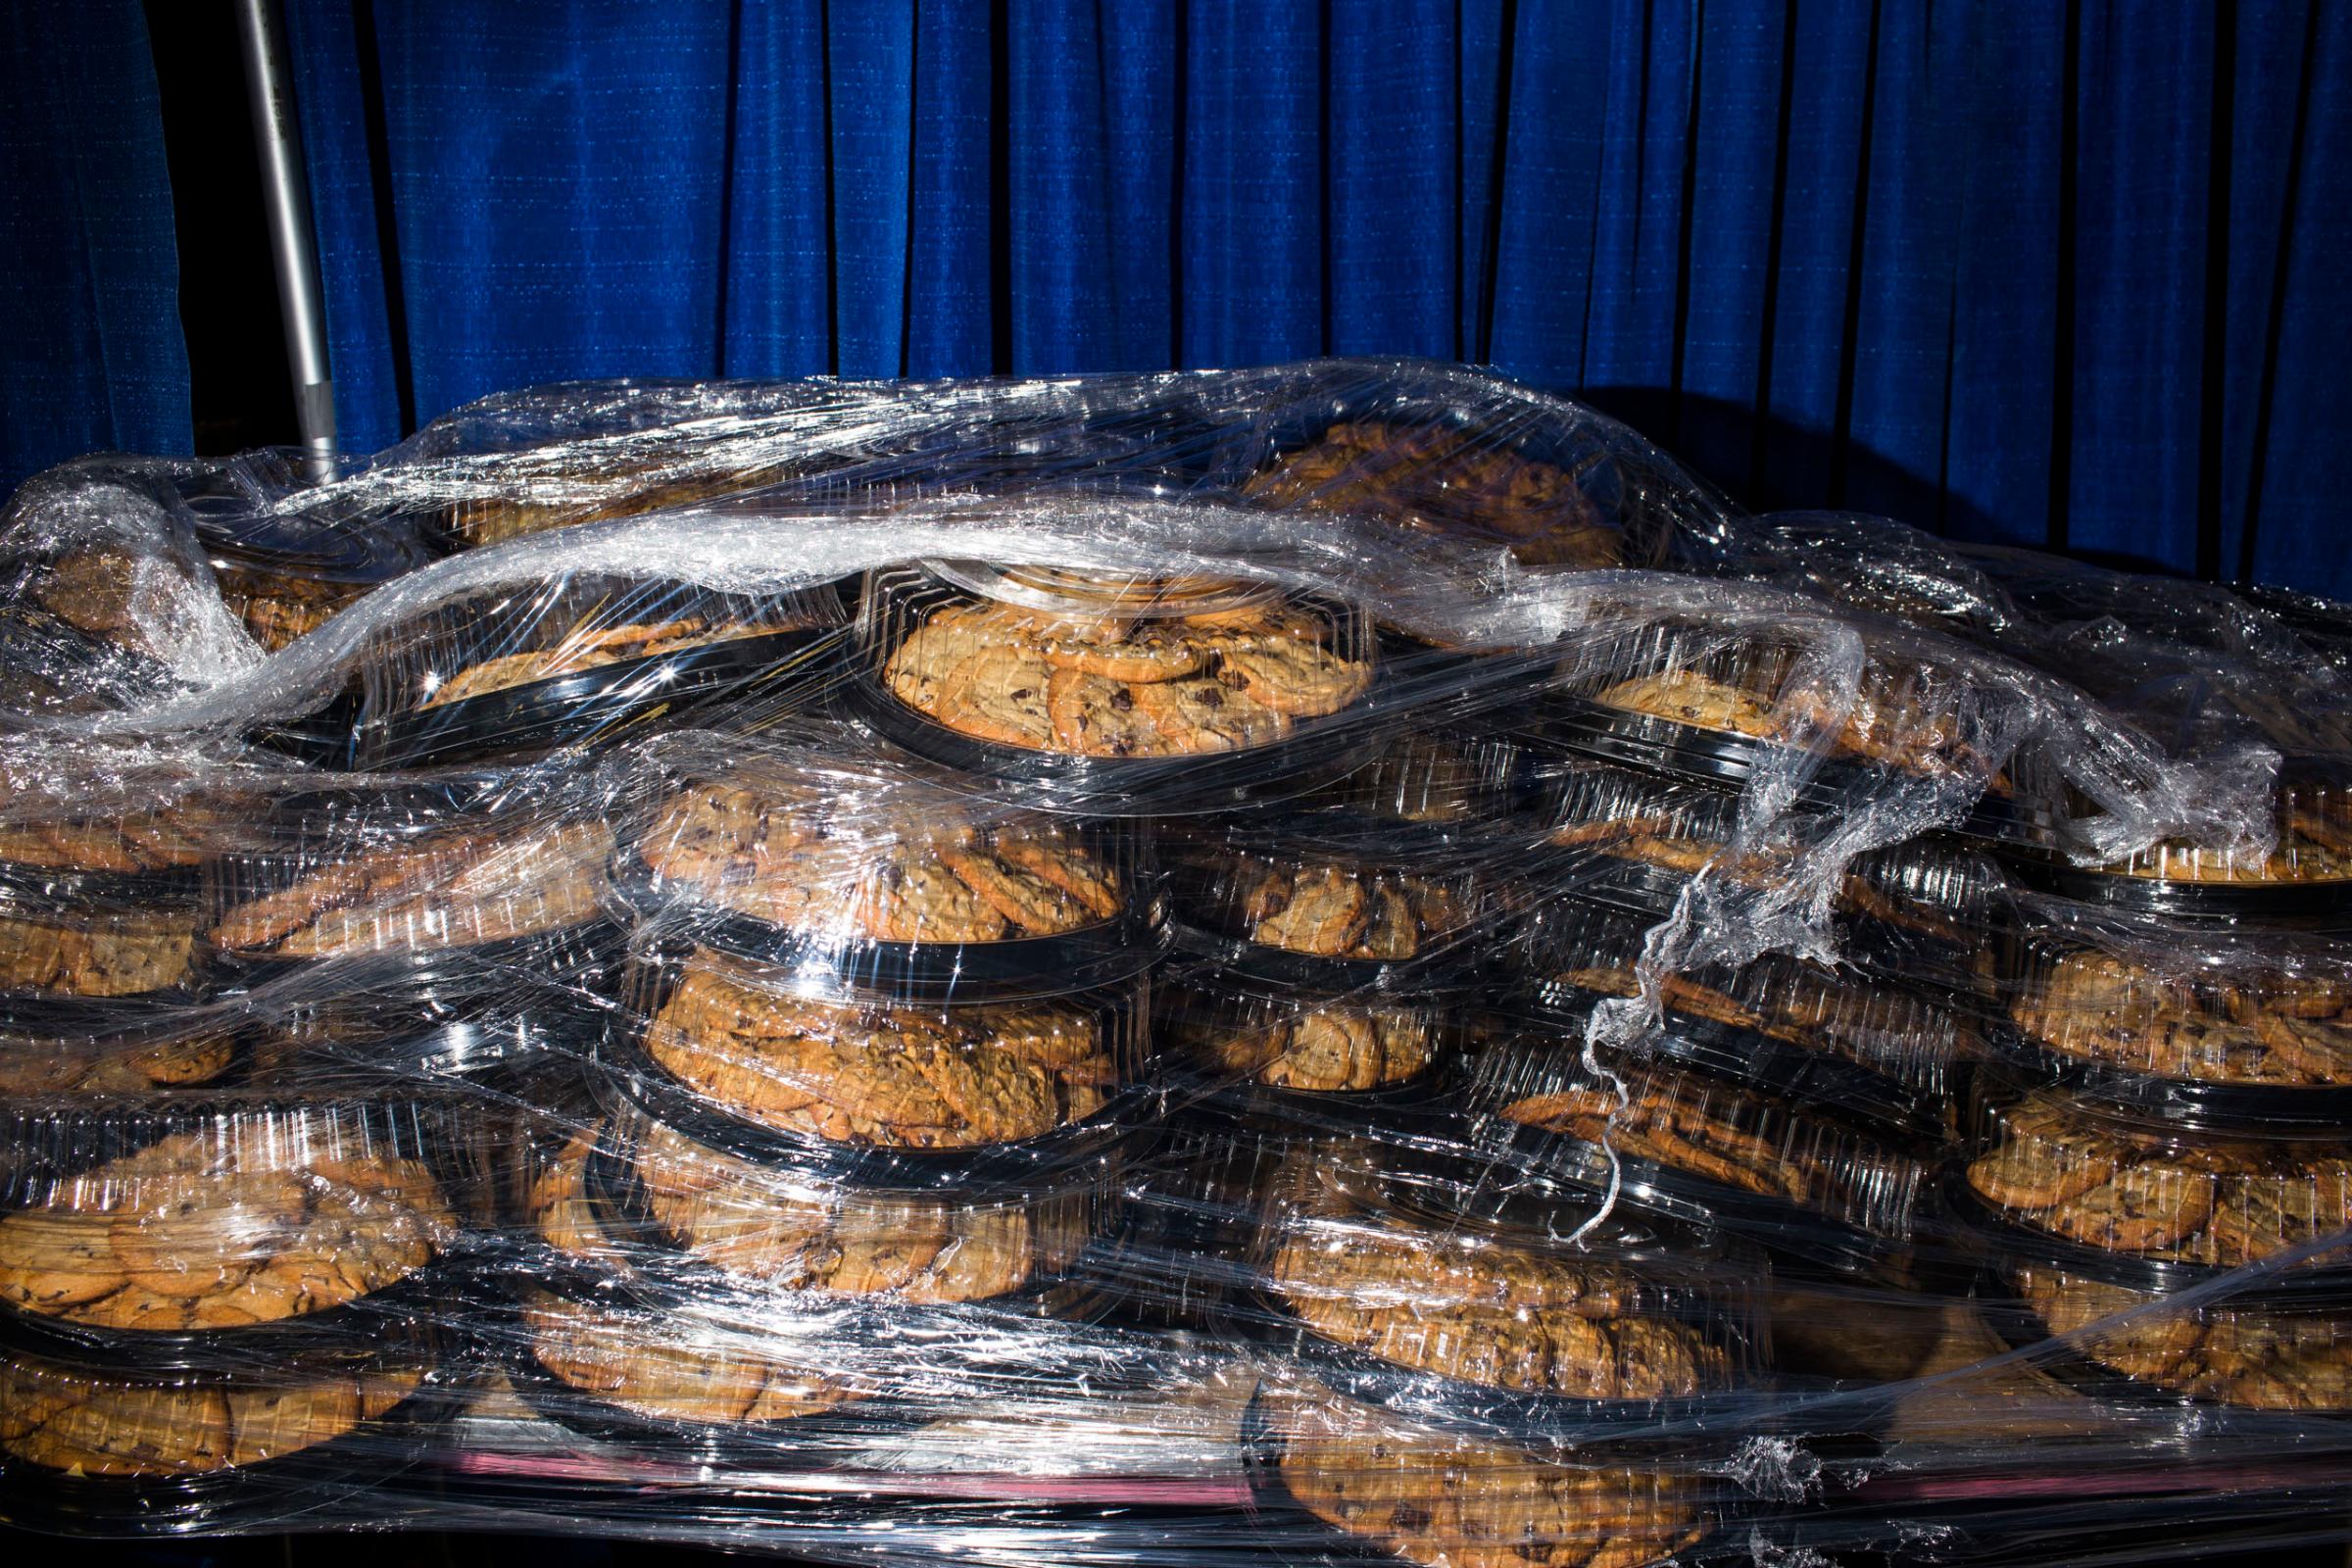 Cookies under wraps at the 2016 Democratic National Convention in Philadelphia on Tuesday, July 26, 2016.